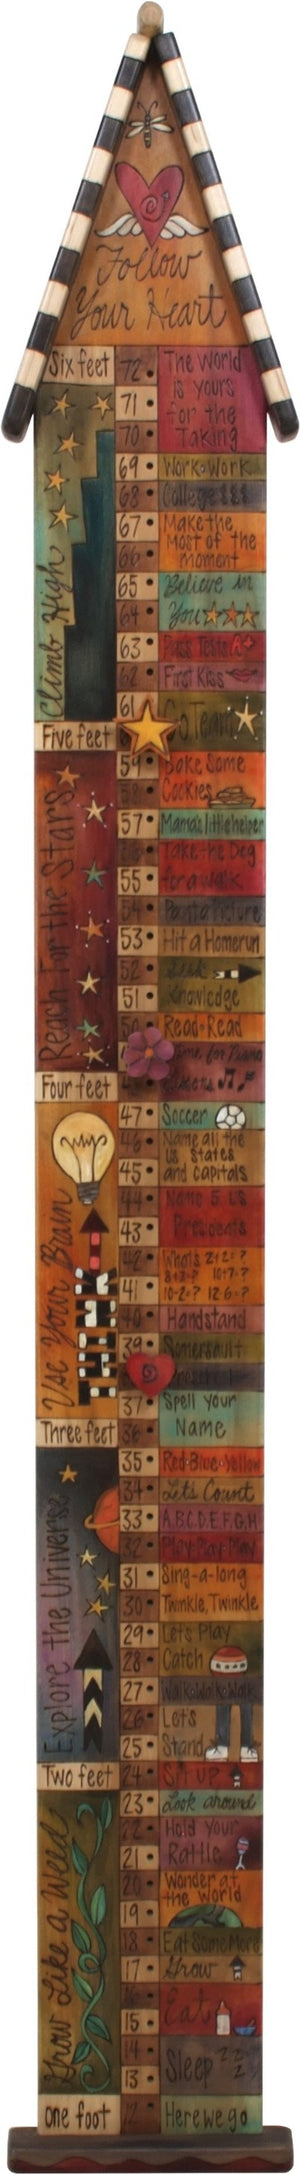 Growth Chart with Pegs –  "Follow Your Heart" growth chart with pegs with heart and wings motif